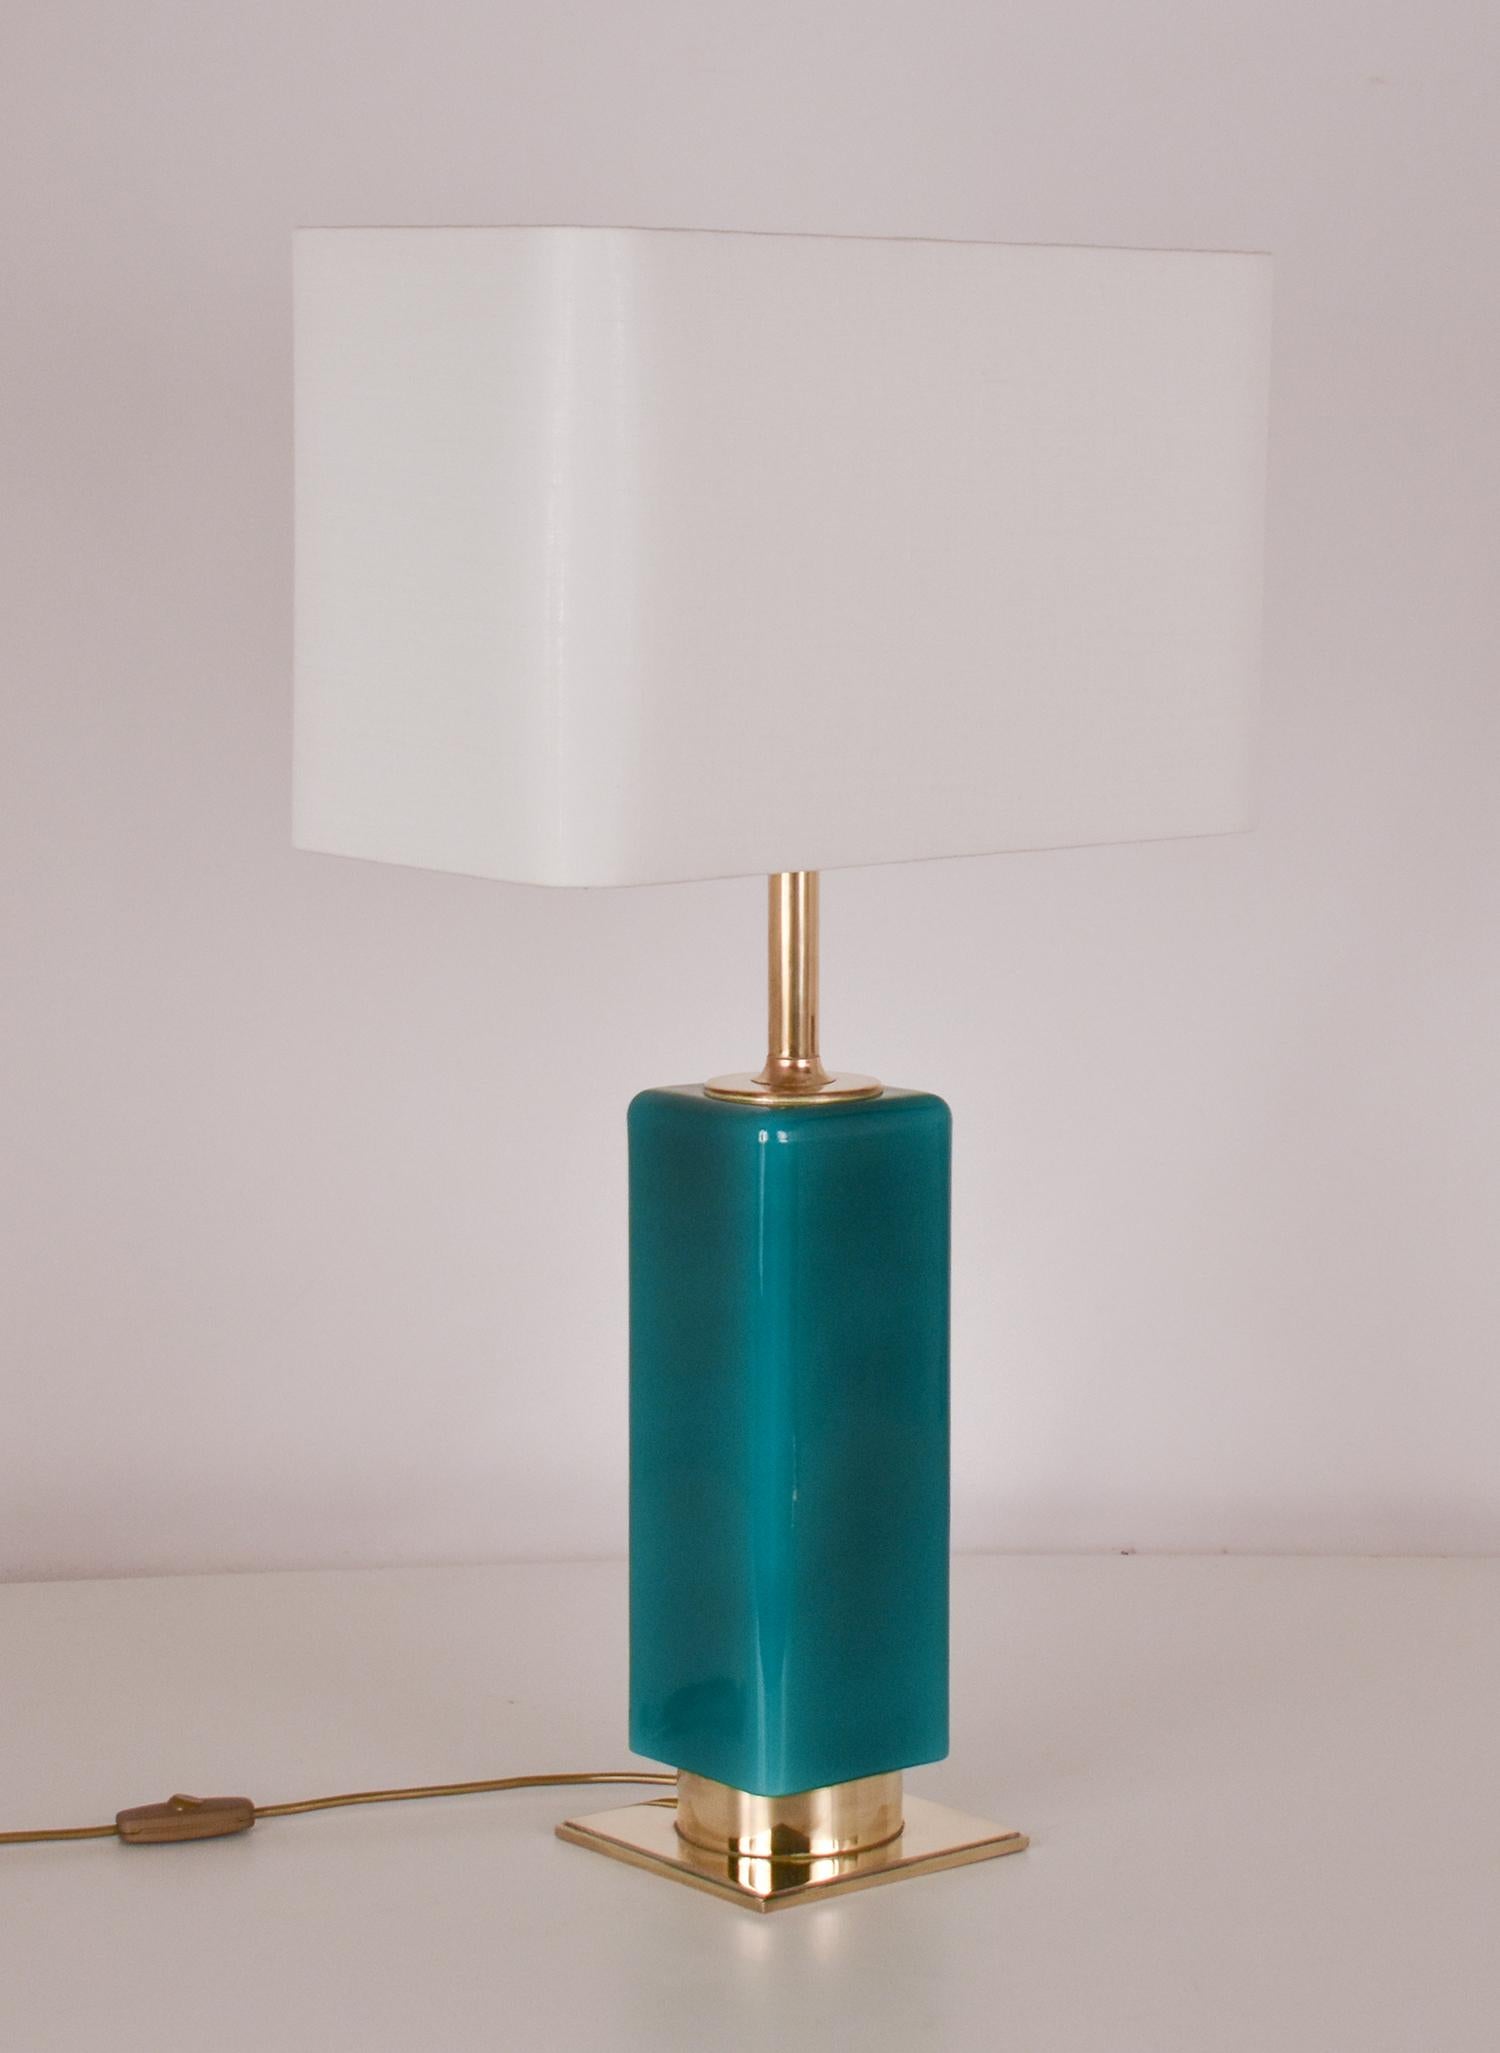 Mid- Century Large Green Glass and Brass Table Lamp Metalarte, Spain, 1970's For Sale 6